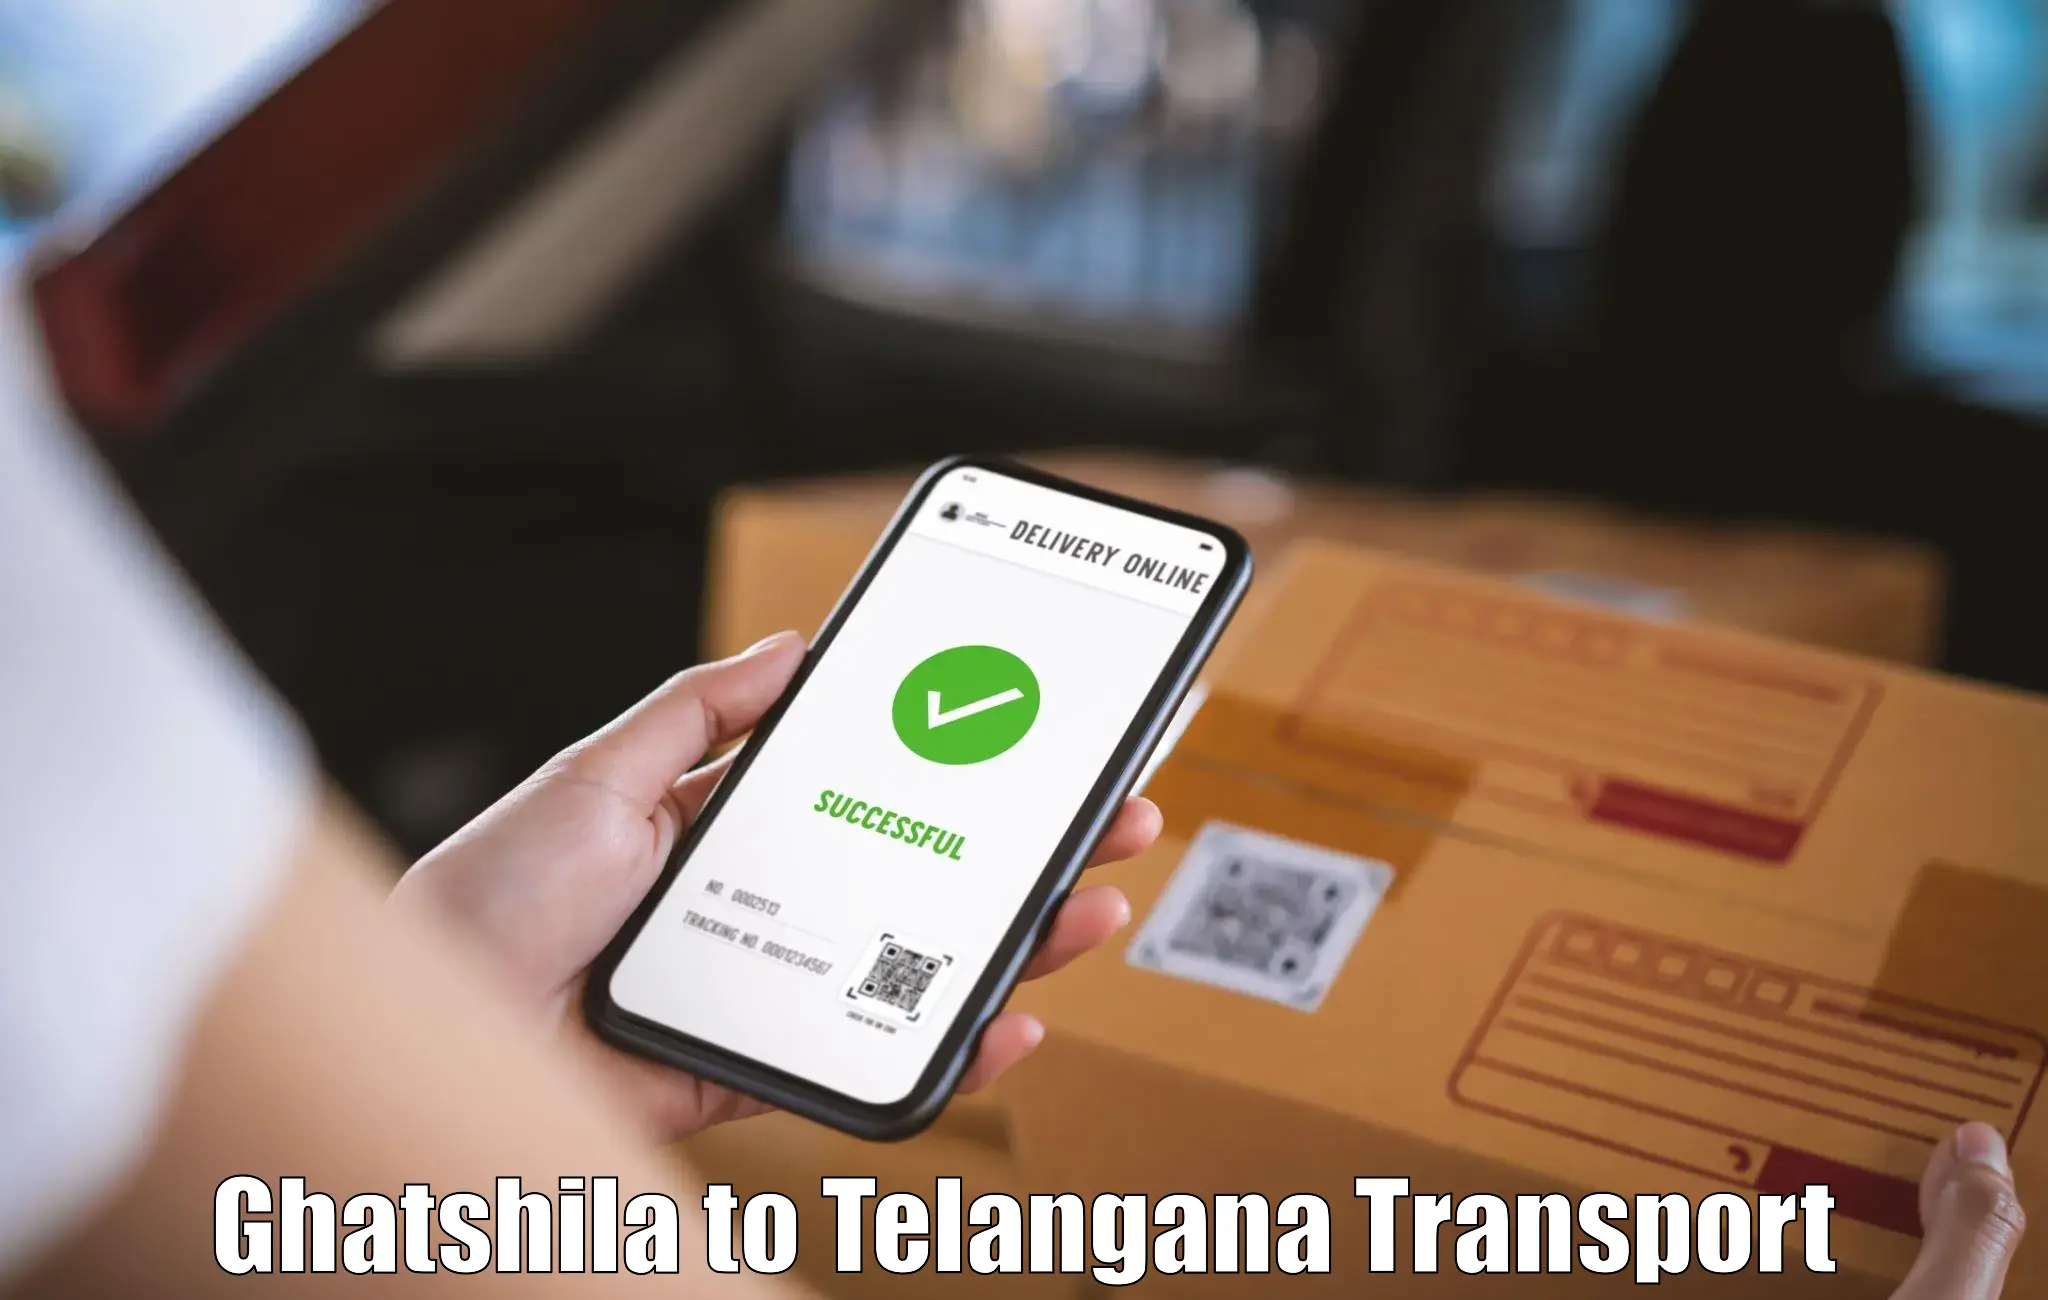 Air freight transport services in Ghatshila to Manopad